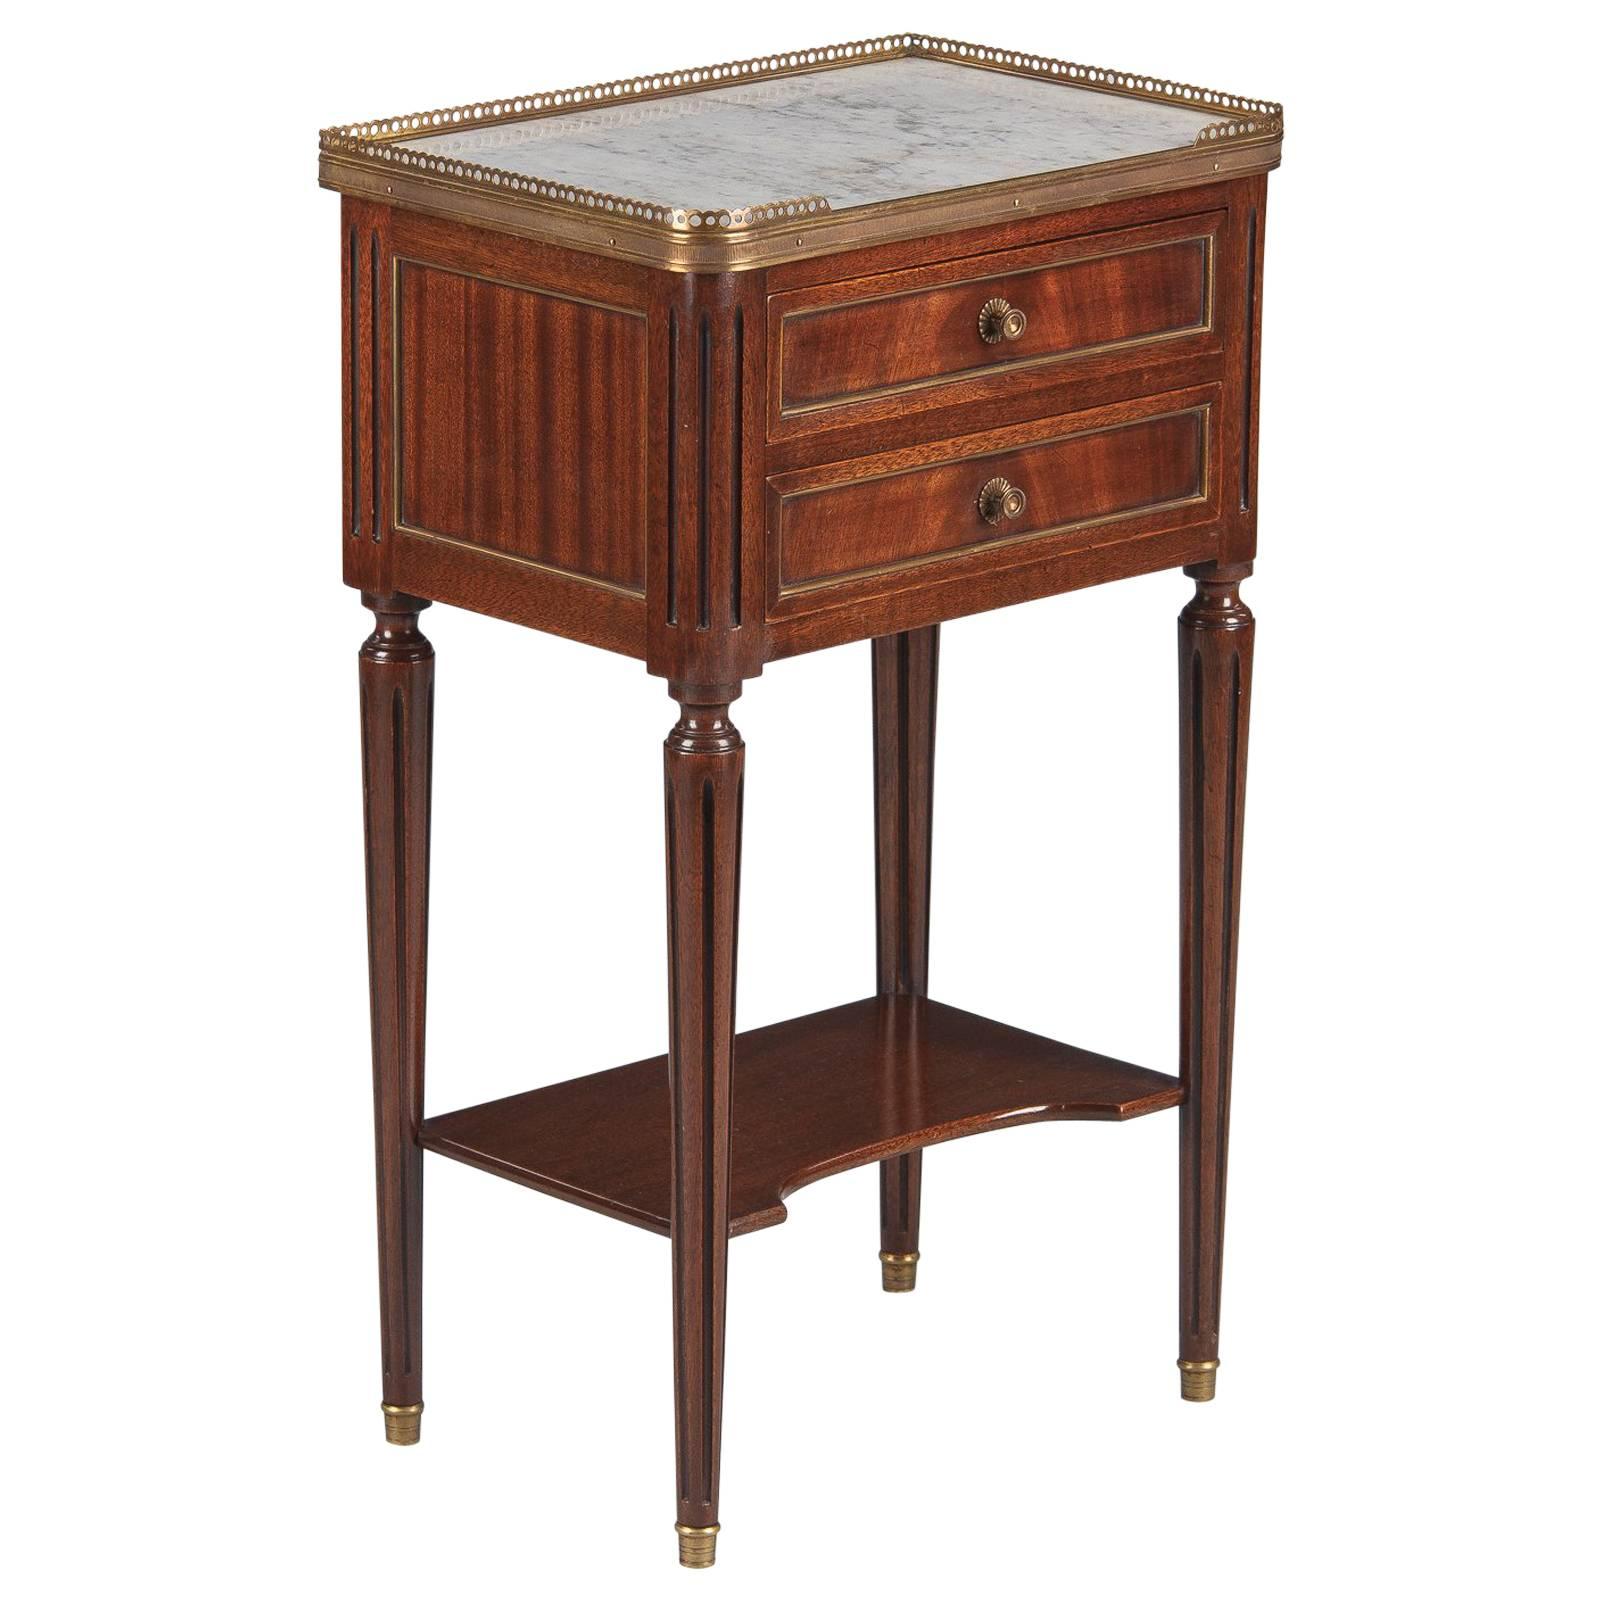 Louis XVI Style Marble-Top Bedside Cabinet, 1920s